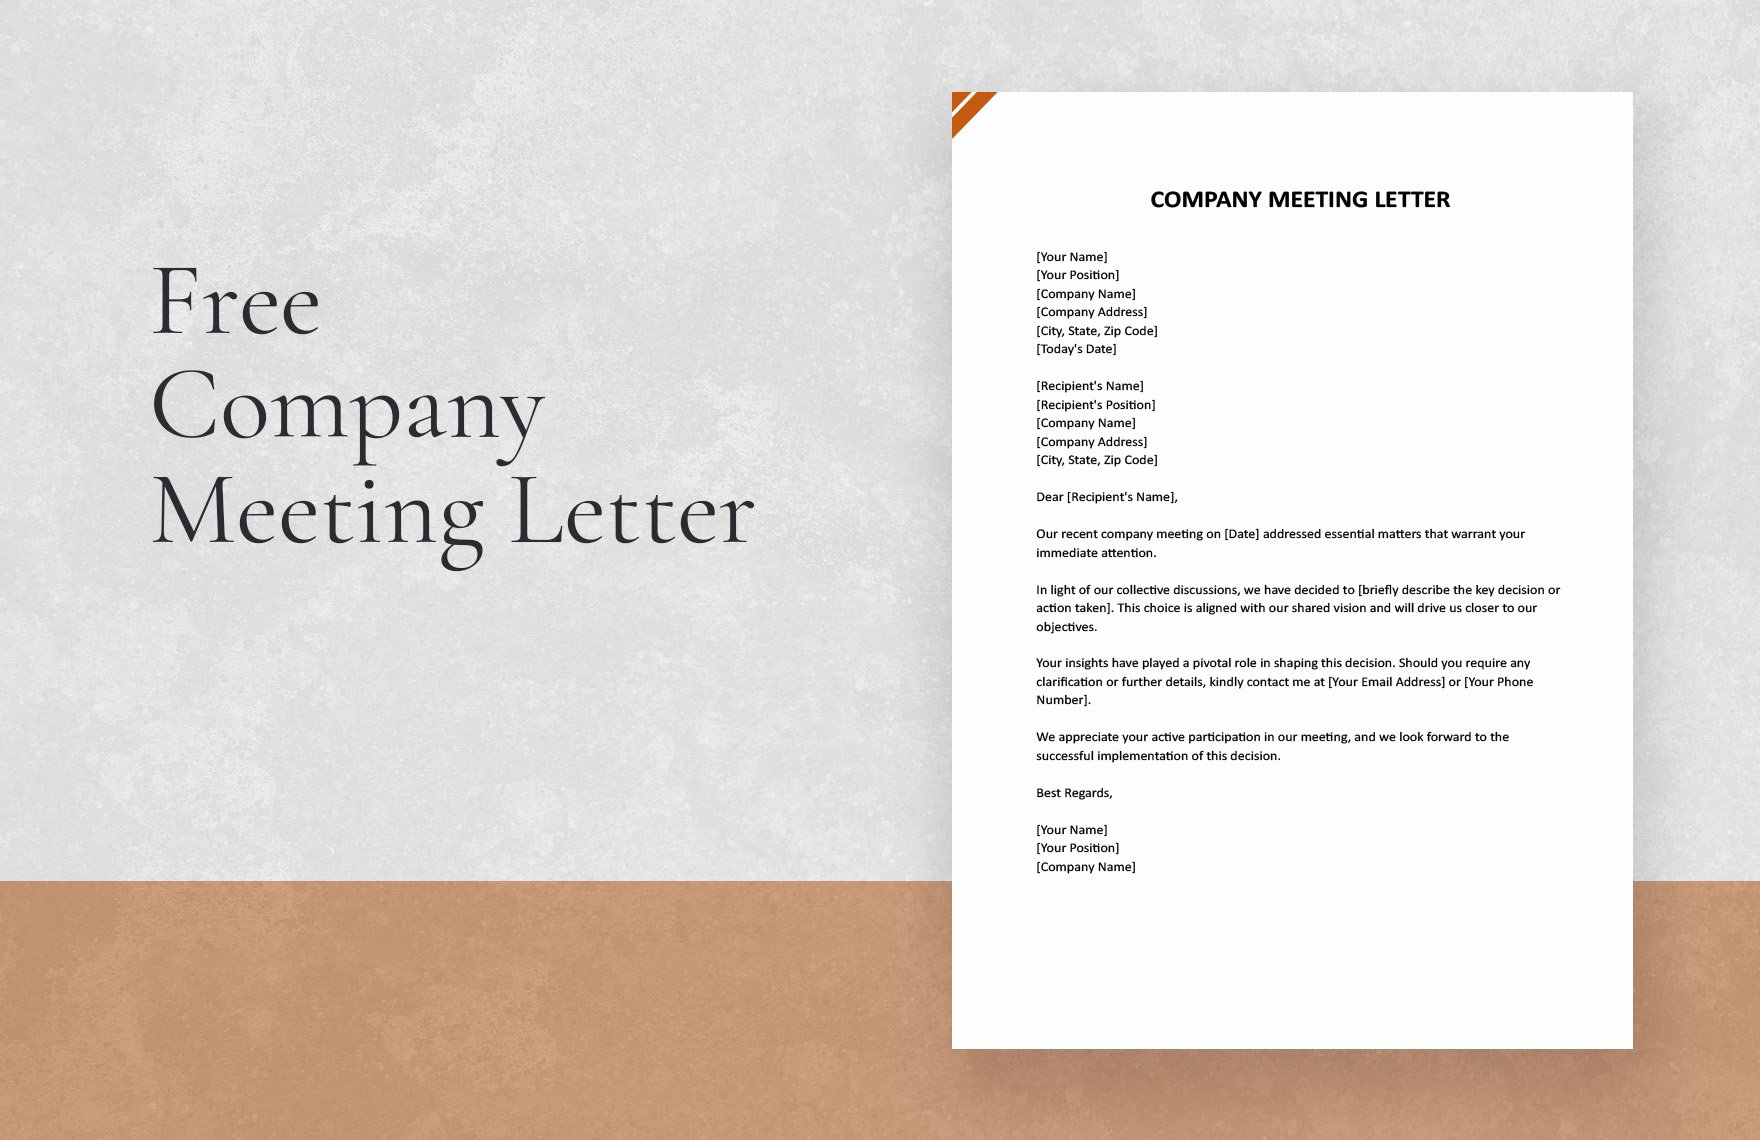 Free Company Meeting Letter in Word, Google Docs